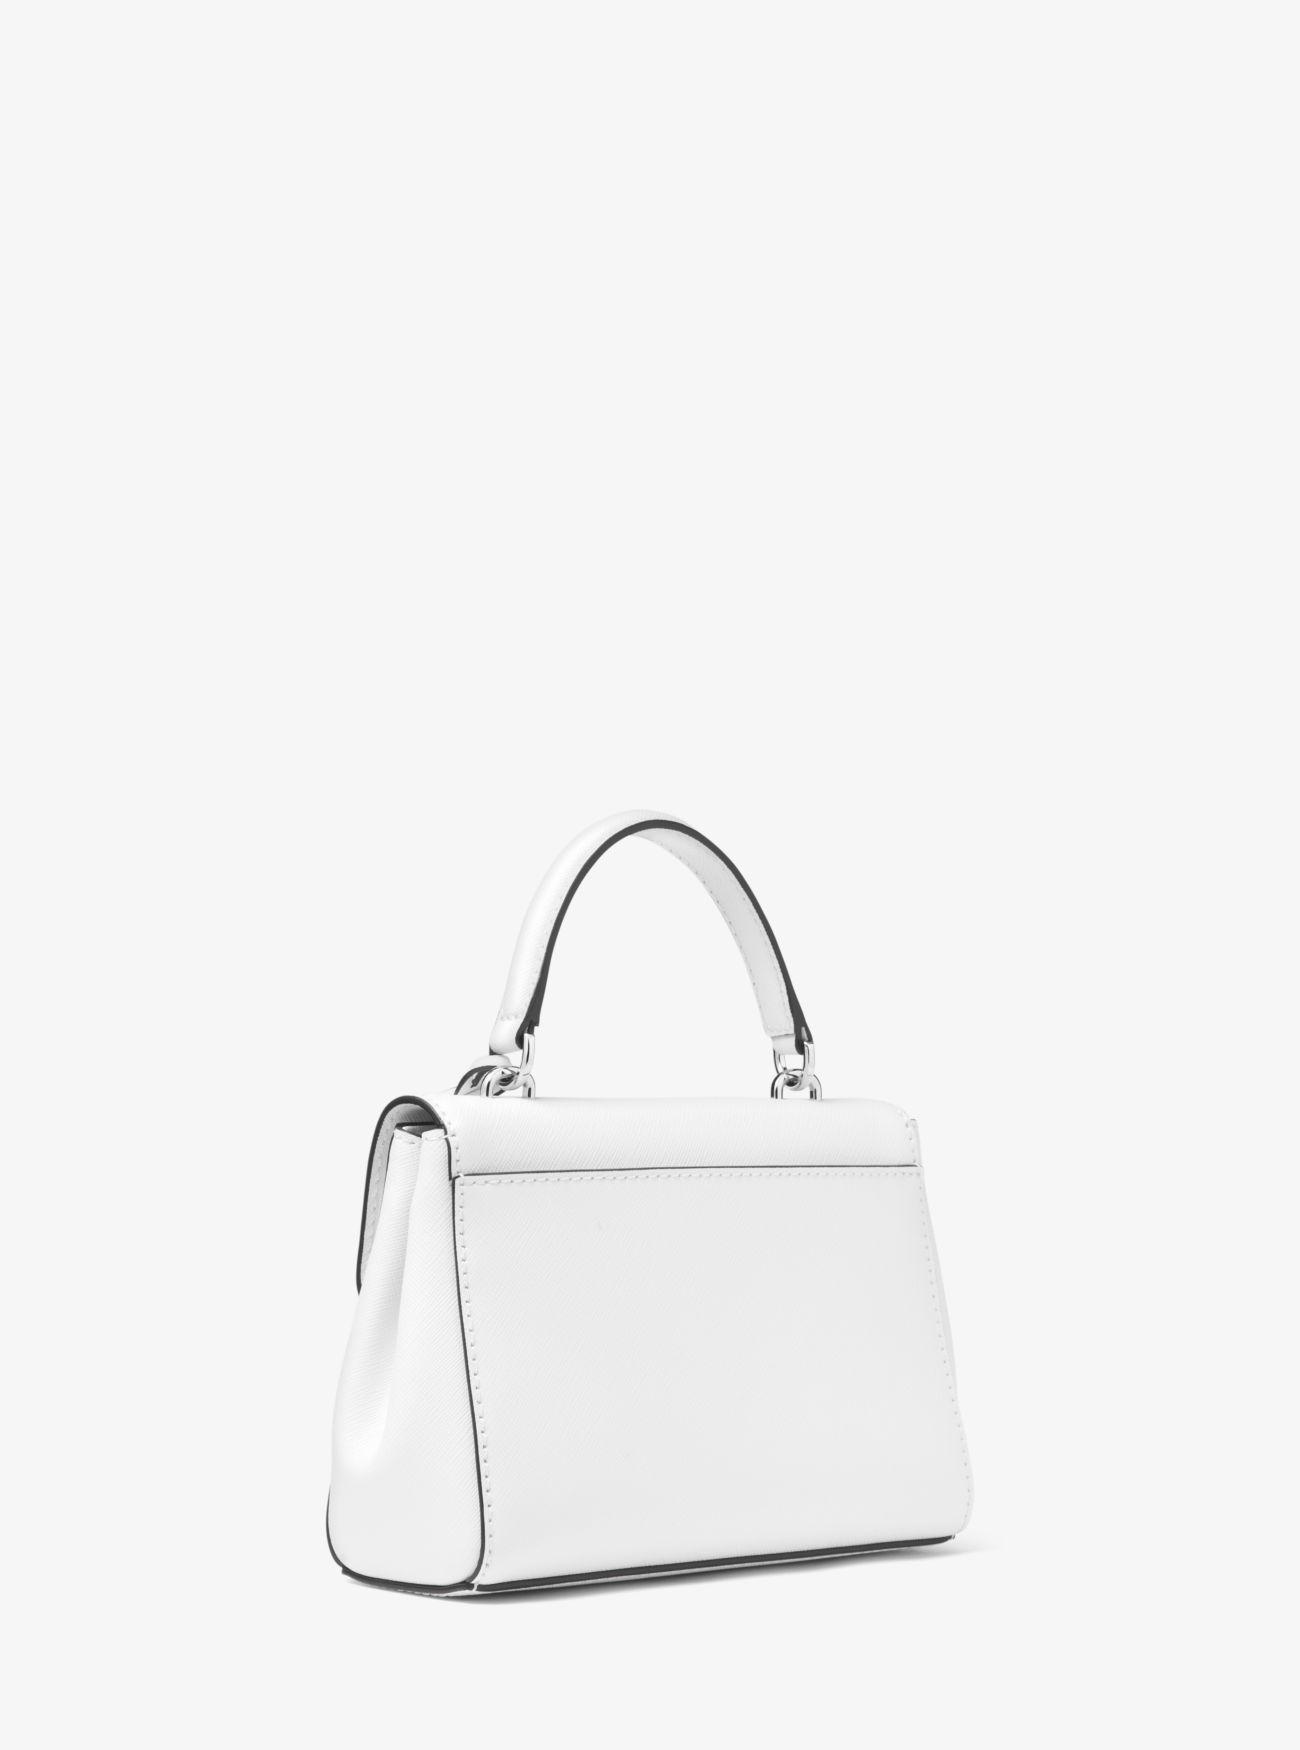 Michael Kors Ava Extra-small Saffiano Leather Crossbody Bag in White